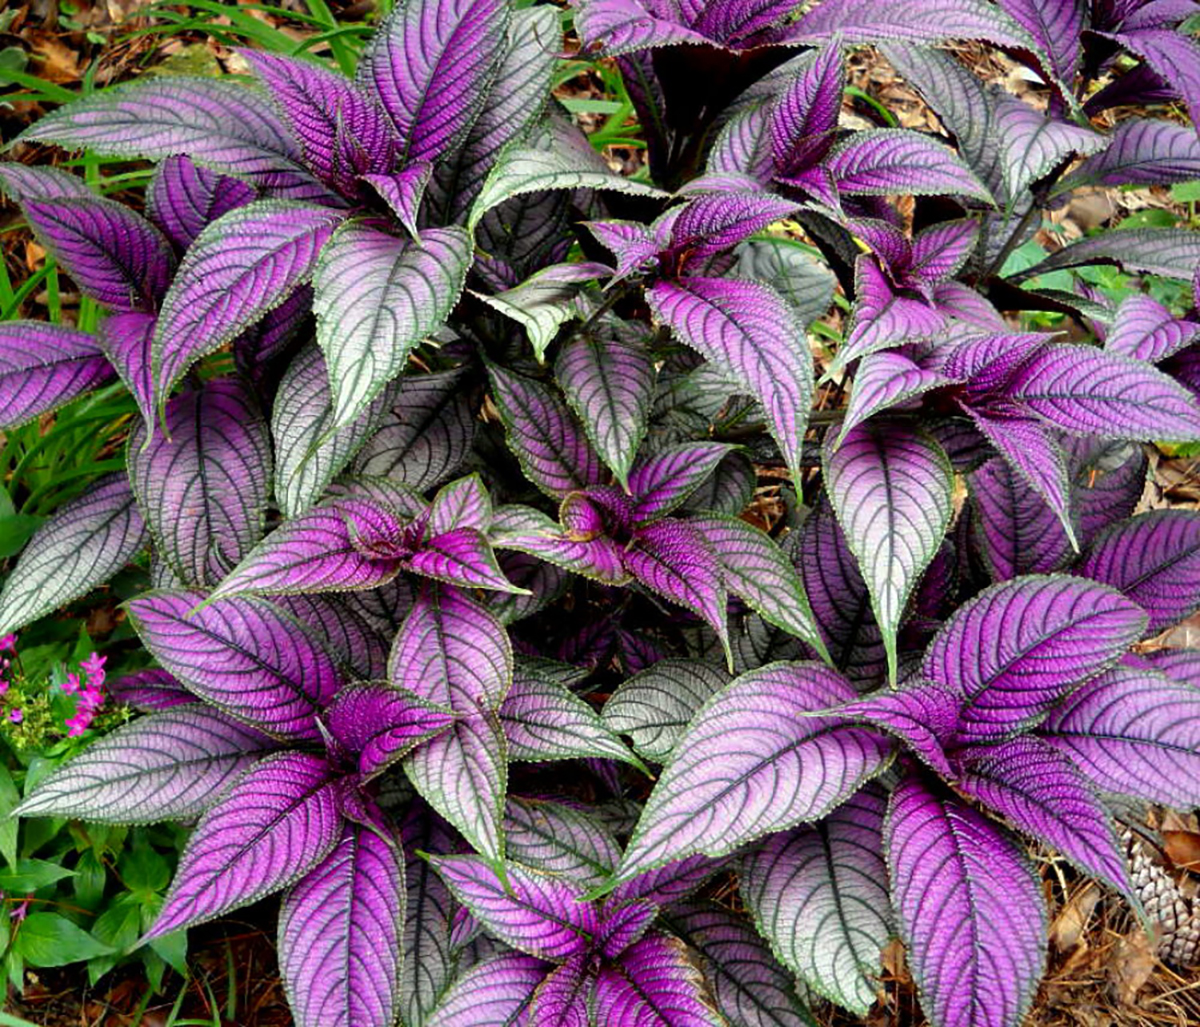 Persian Shield Live Plant   Strobilanthes   Inside/Out   20